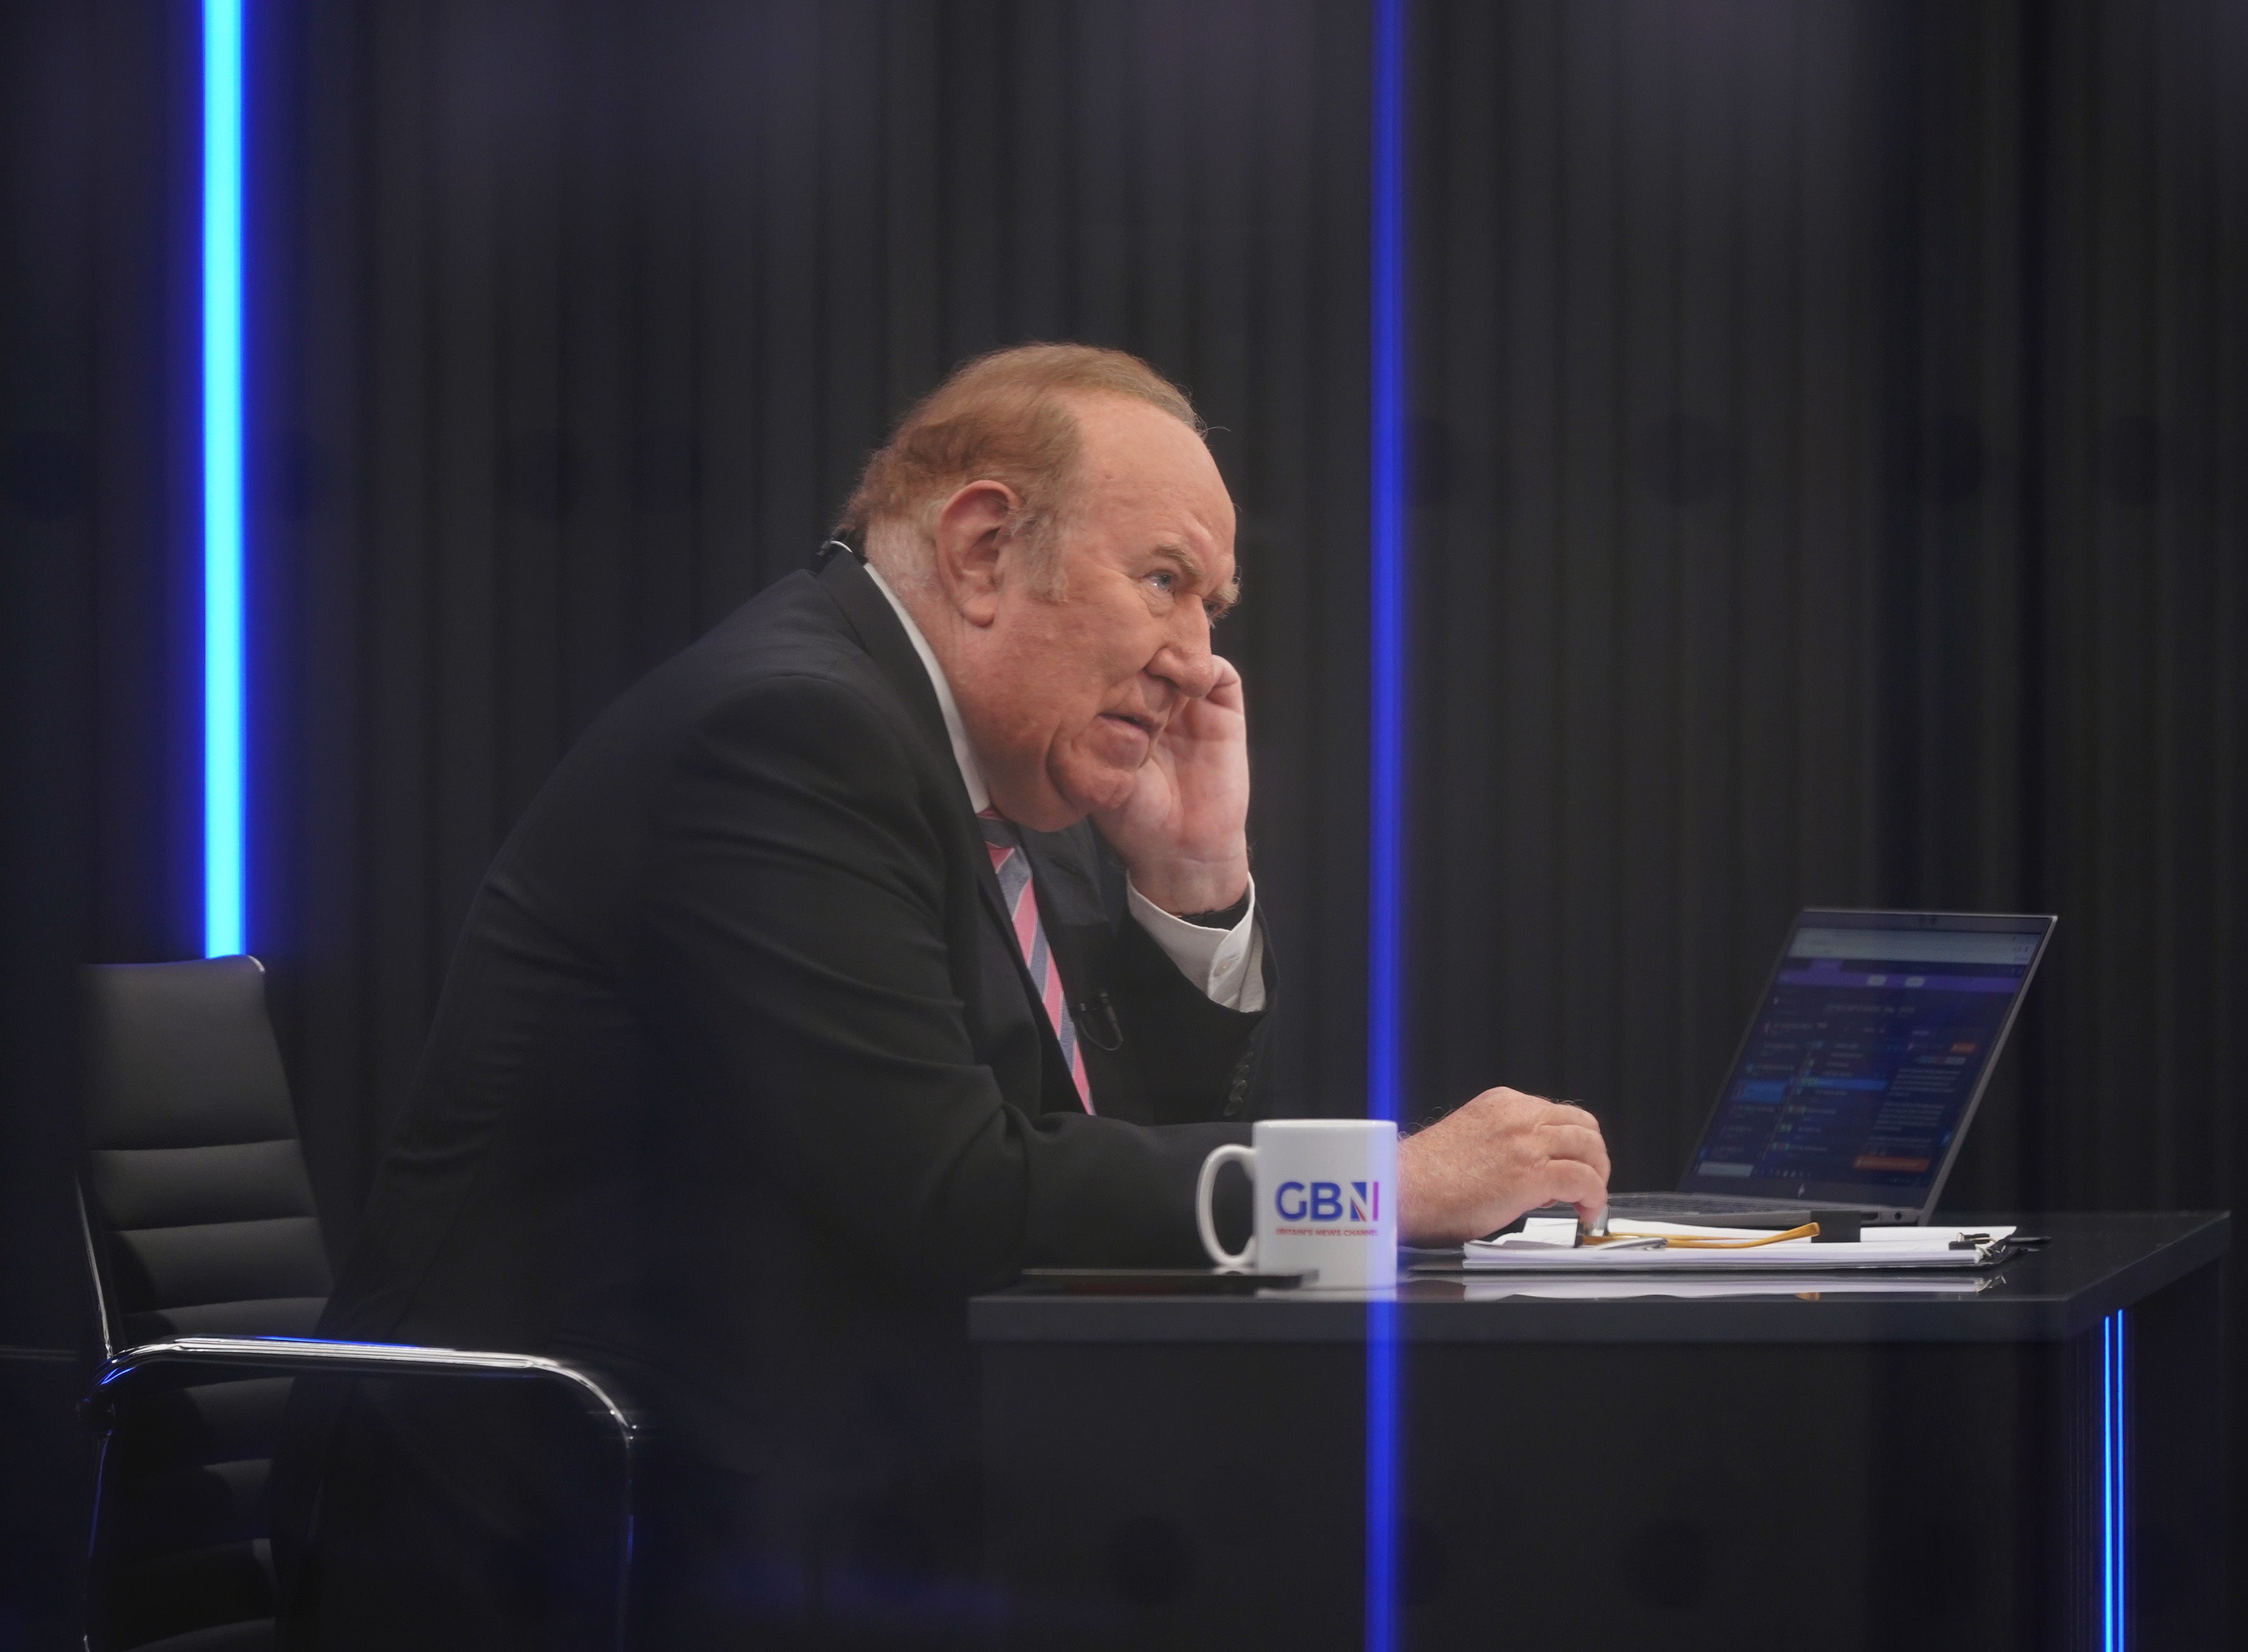 Presenter Andrew Neil prepares to broadcast from a studio during the launch event for GB News